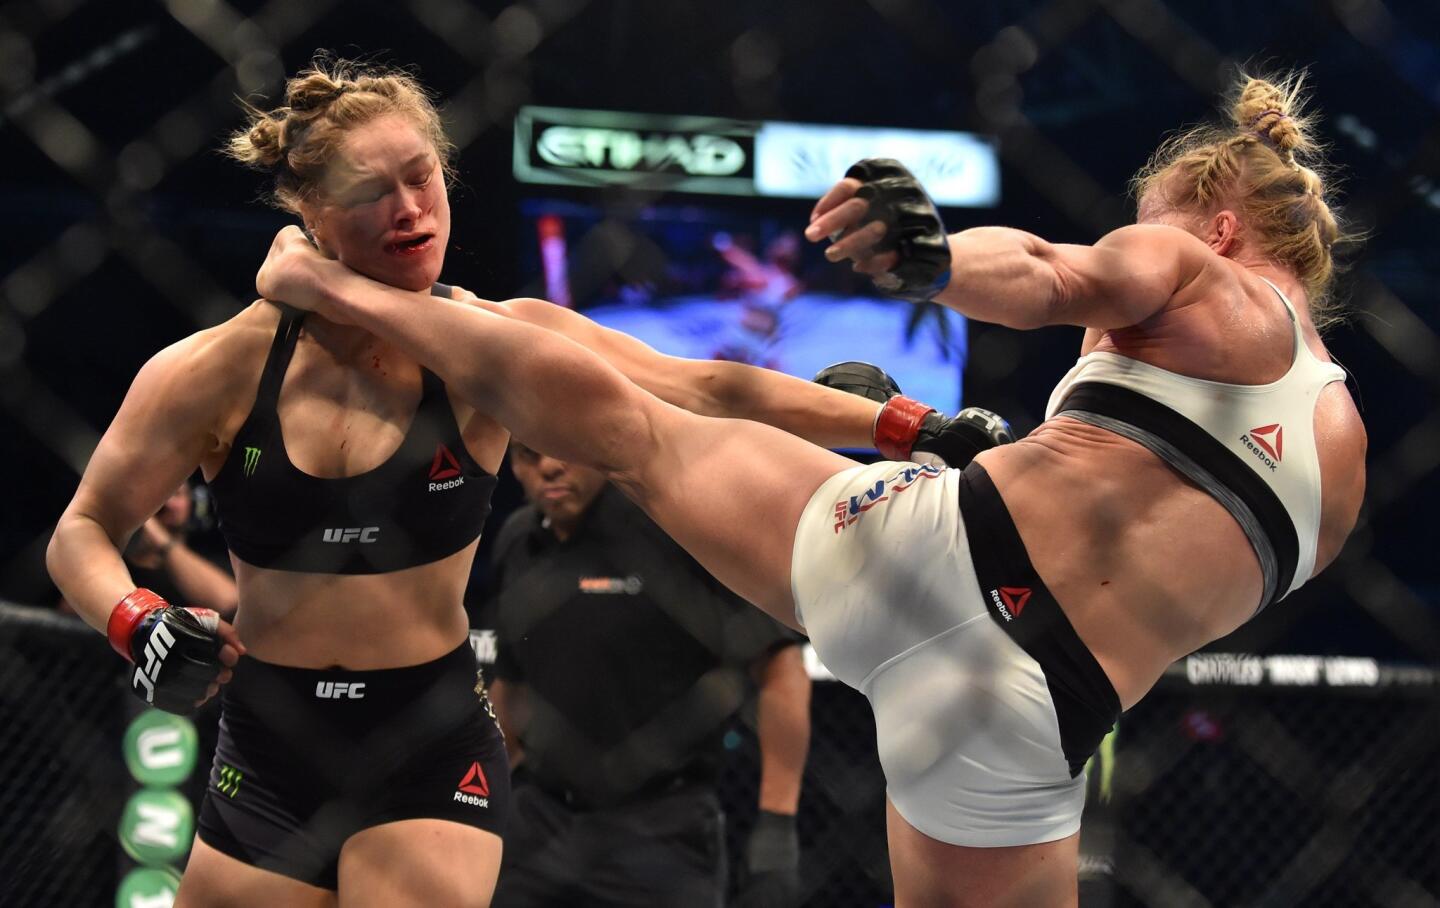 UFC 193: Rousey vs Holm